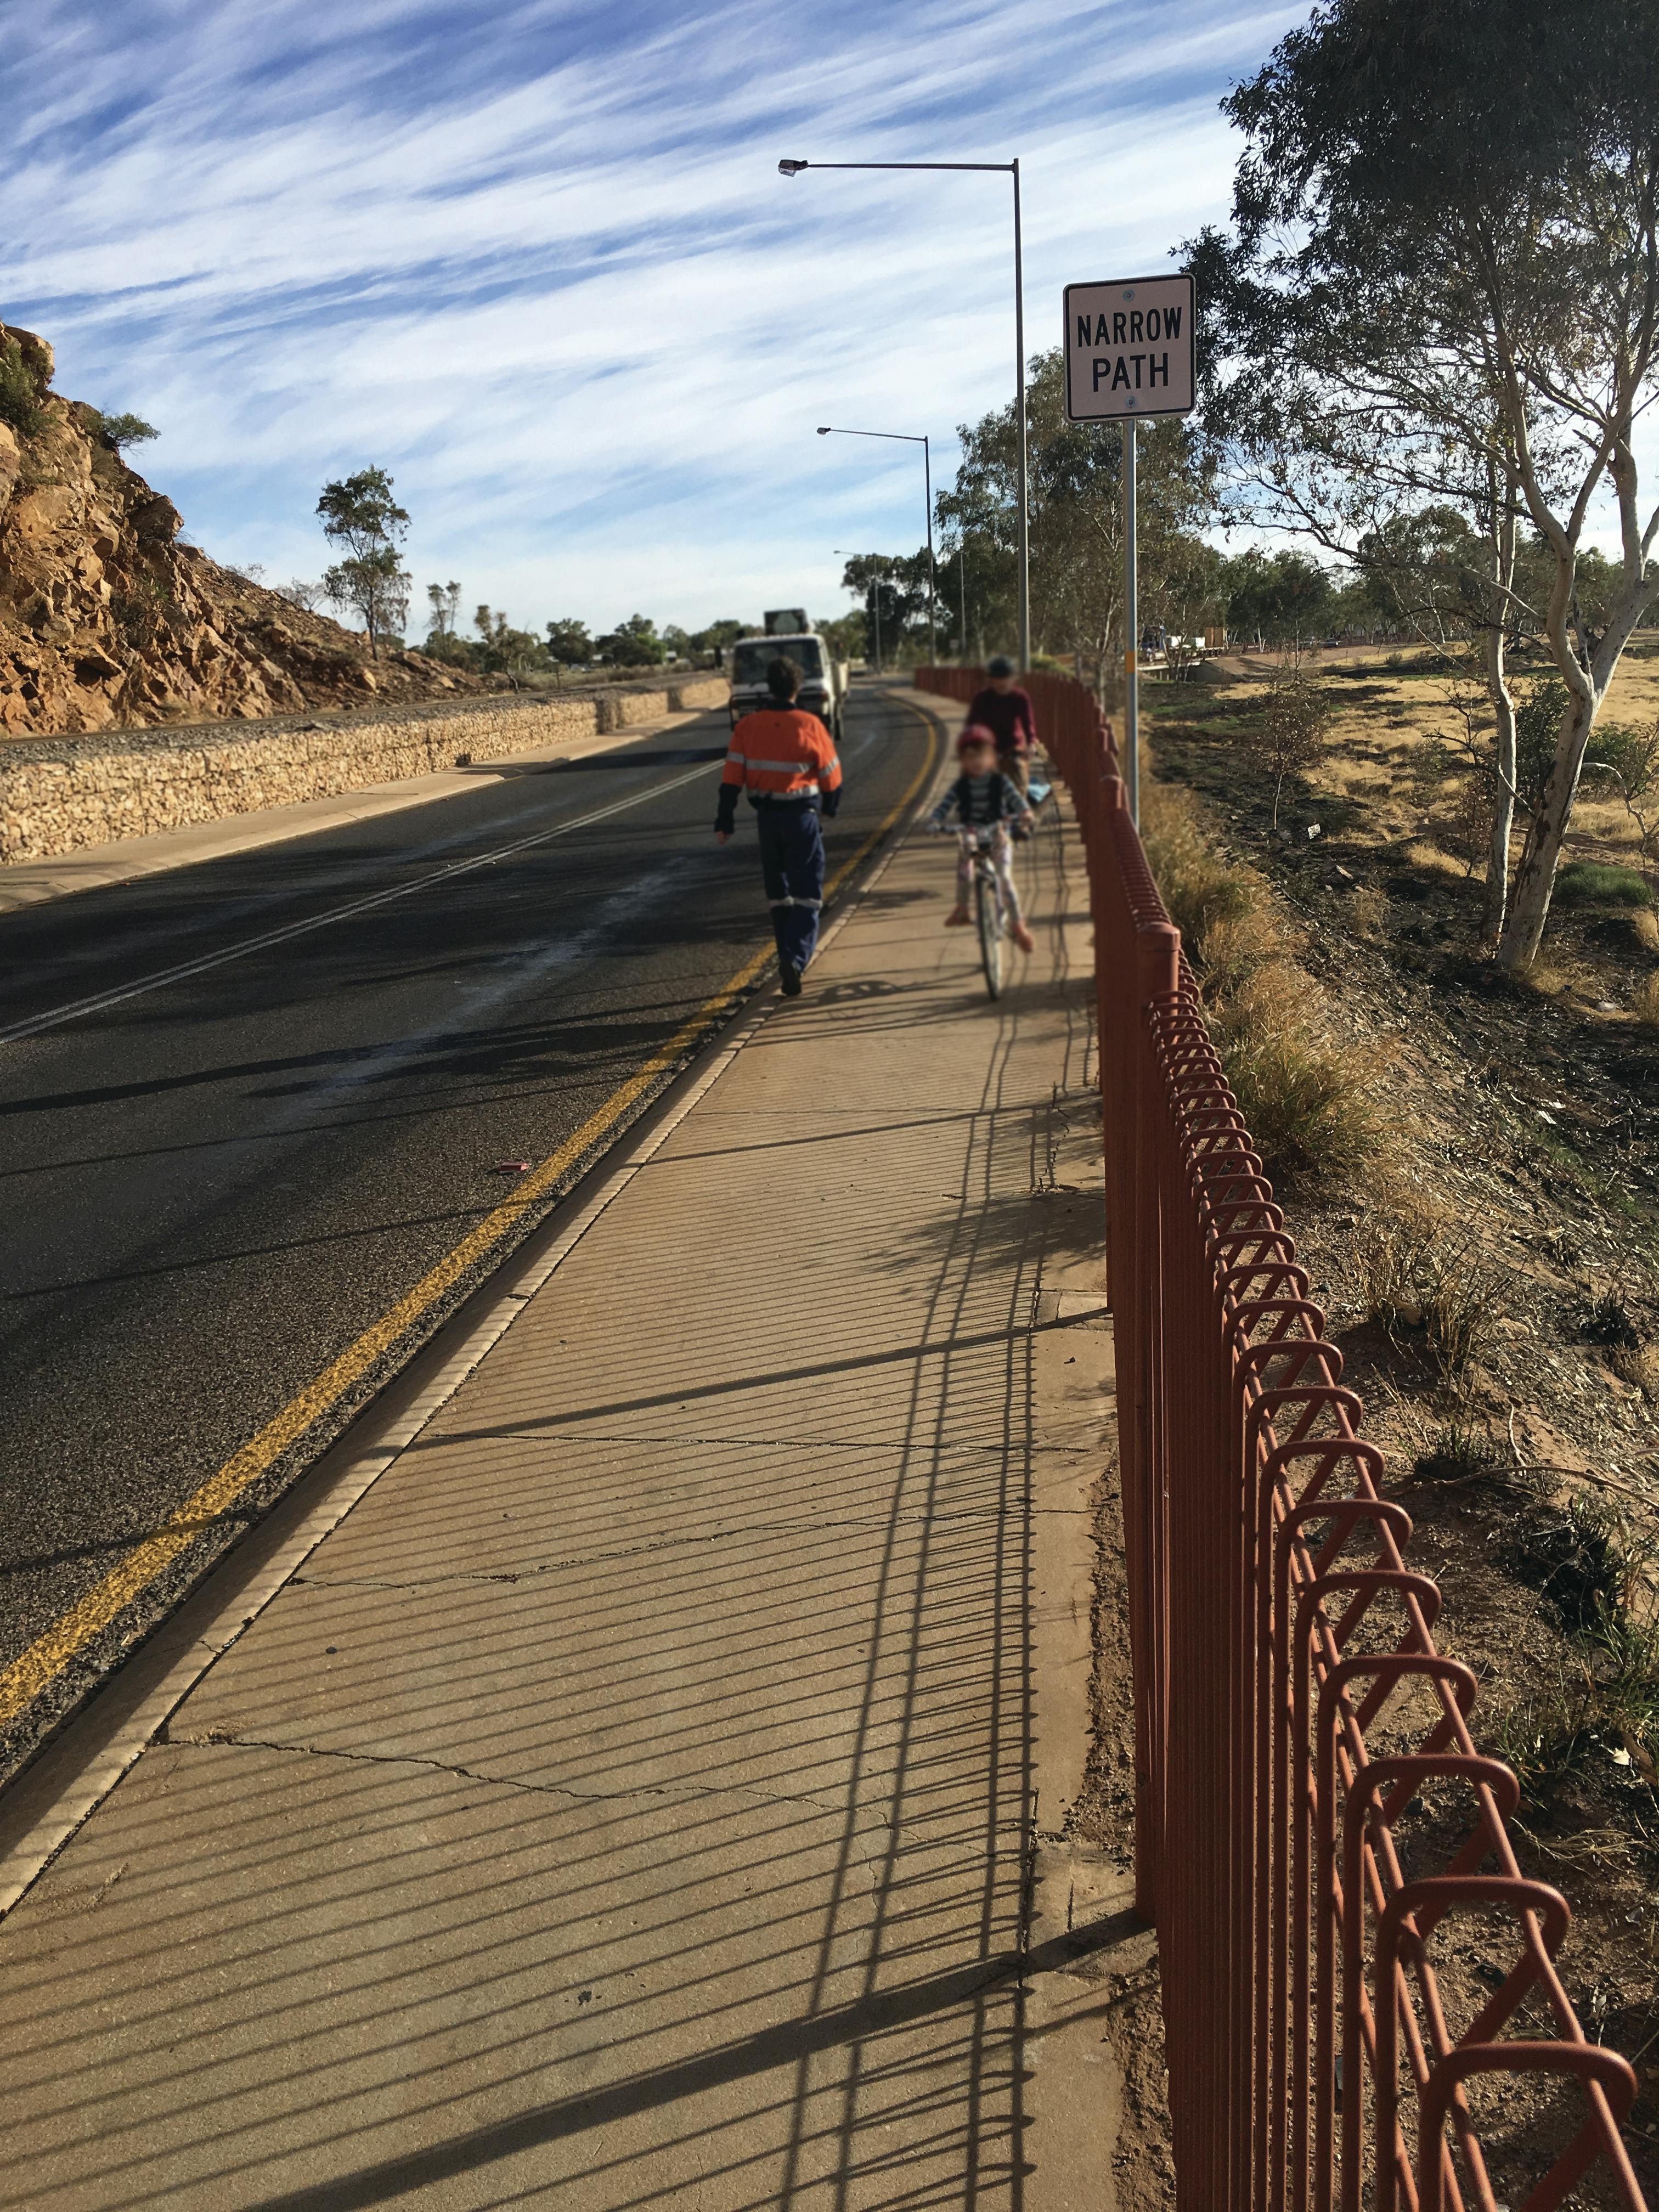 Shared path at The Gap (Ntaripe) used by pedestrians and cyclists